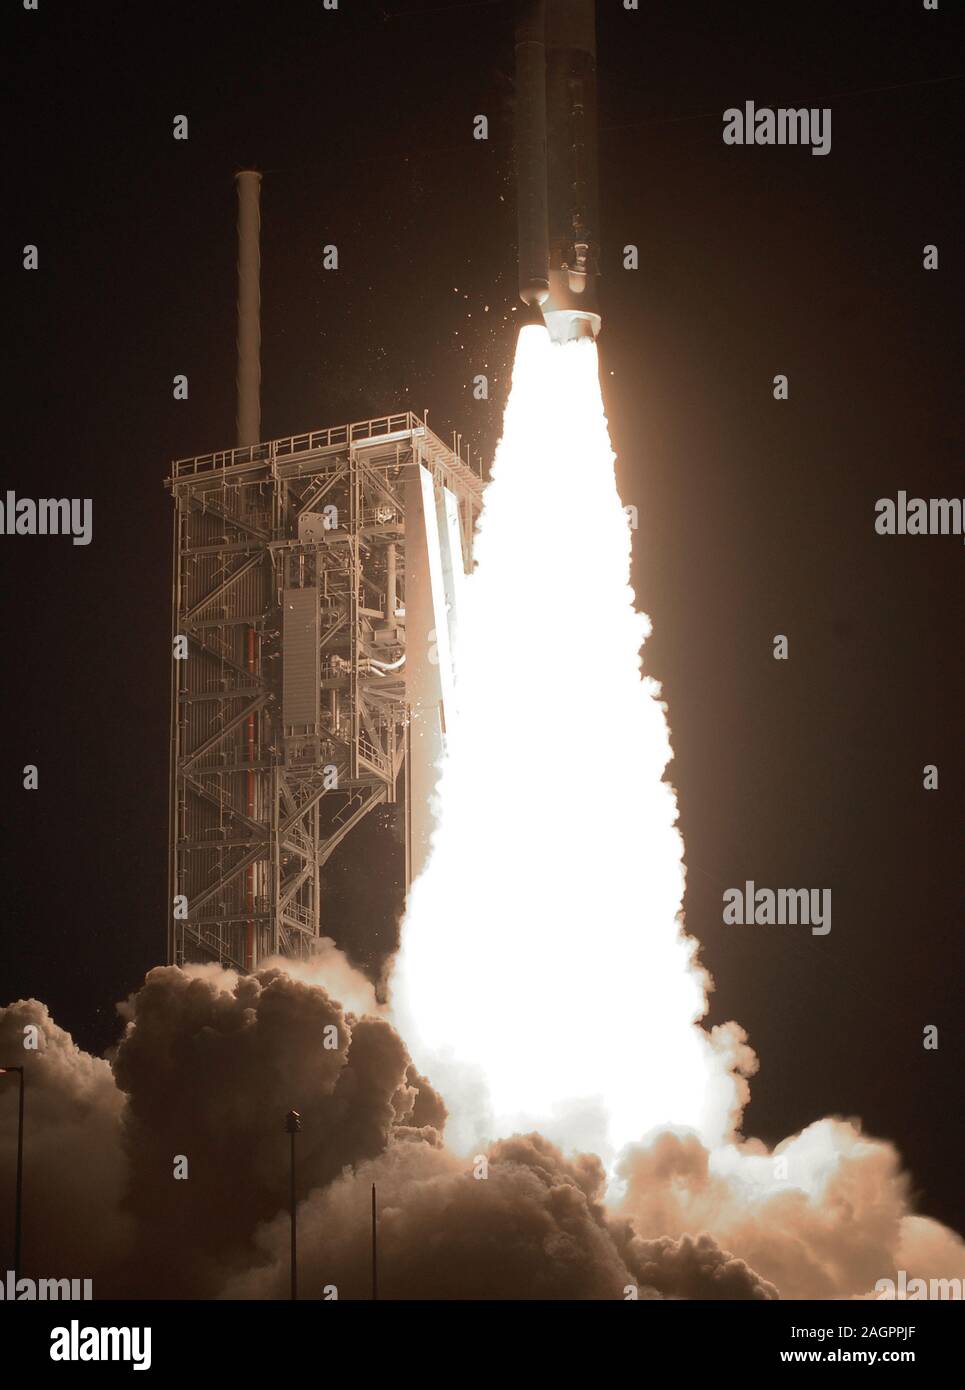 Cape Canaveral, United States. 20th Dec, 2019. Cape Canaveral, United States. 20th Dec, 2019. A United Launch Alliance Atlas V rocket carrying the Boeing CST-100 Starliner spacecraft lifts off from Space Launch Complex 41 at Cape Canaveral Air Force Station on an unmanned orbital flight test mission to the International Space Station (ISS) on December 20, 2019 in Cape Canaveral, Florida. As a successor to the Space Shuttle, the spacecraft is designed to carry astronauts and cargo to the ISS. Credit: Paul Hennessy/Alamy Live News Stock Photo